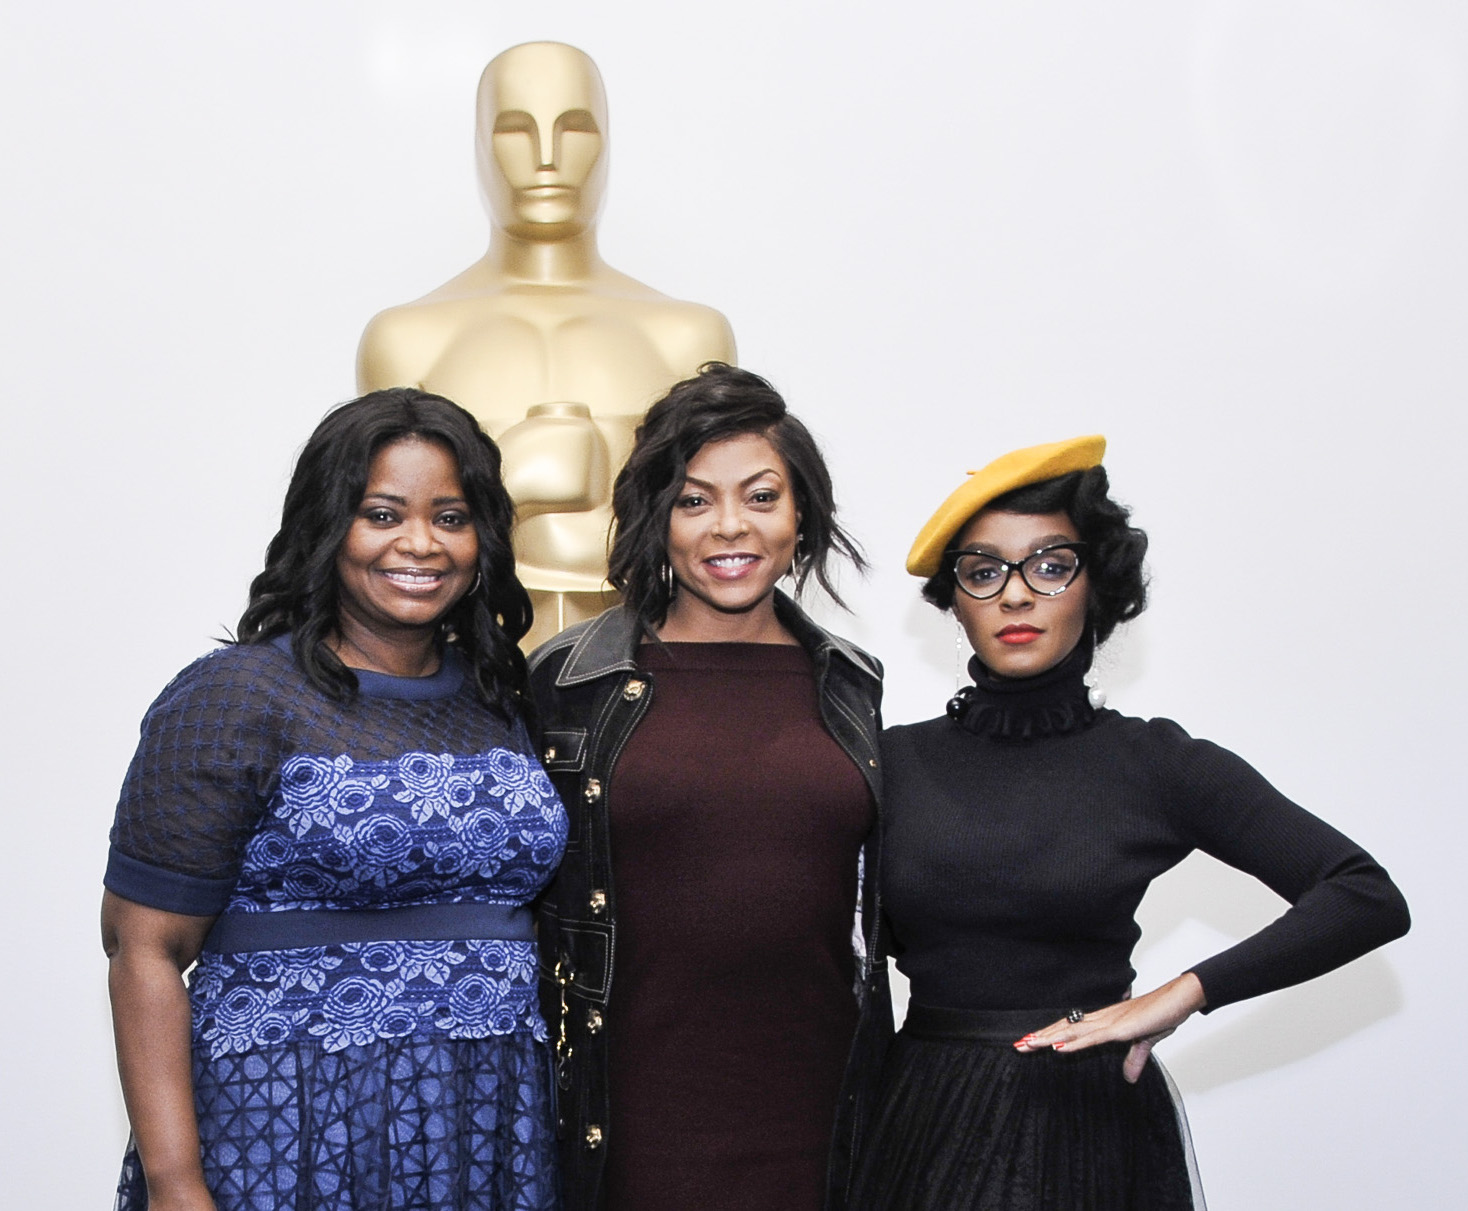 NEW YORK, NY - DECEMBER 08: Octavia Spencer, Taraji P. Henson, and Janelle Monae attend an official academy  screening of HIDDEN FIGURES hosted by the The Academy of Motion Picture Arts and Sciences at MOMA - Celeste Bartos Theater on December 8, 2016 in New York City. (Photo by Kris Connor/Getty Images for Academy of Motion Picture Arts and Sciences)